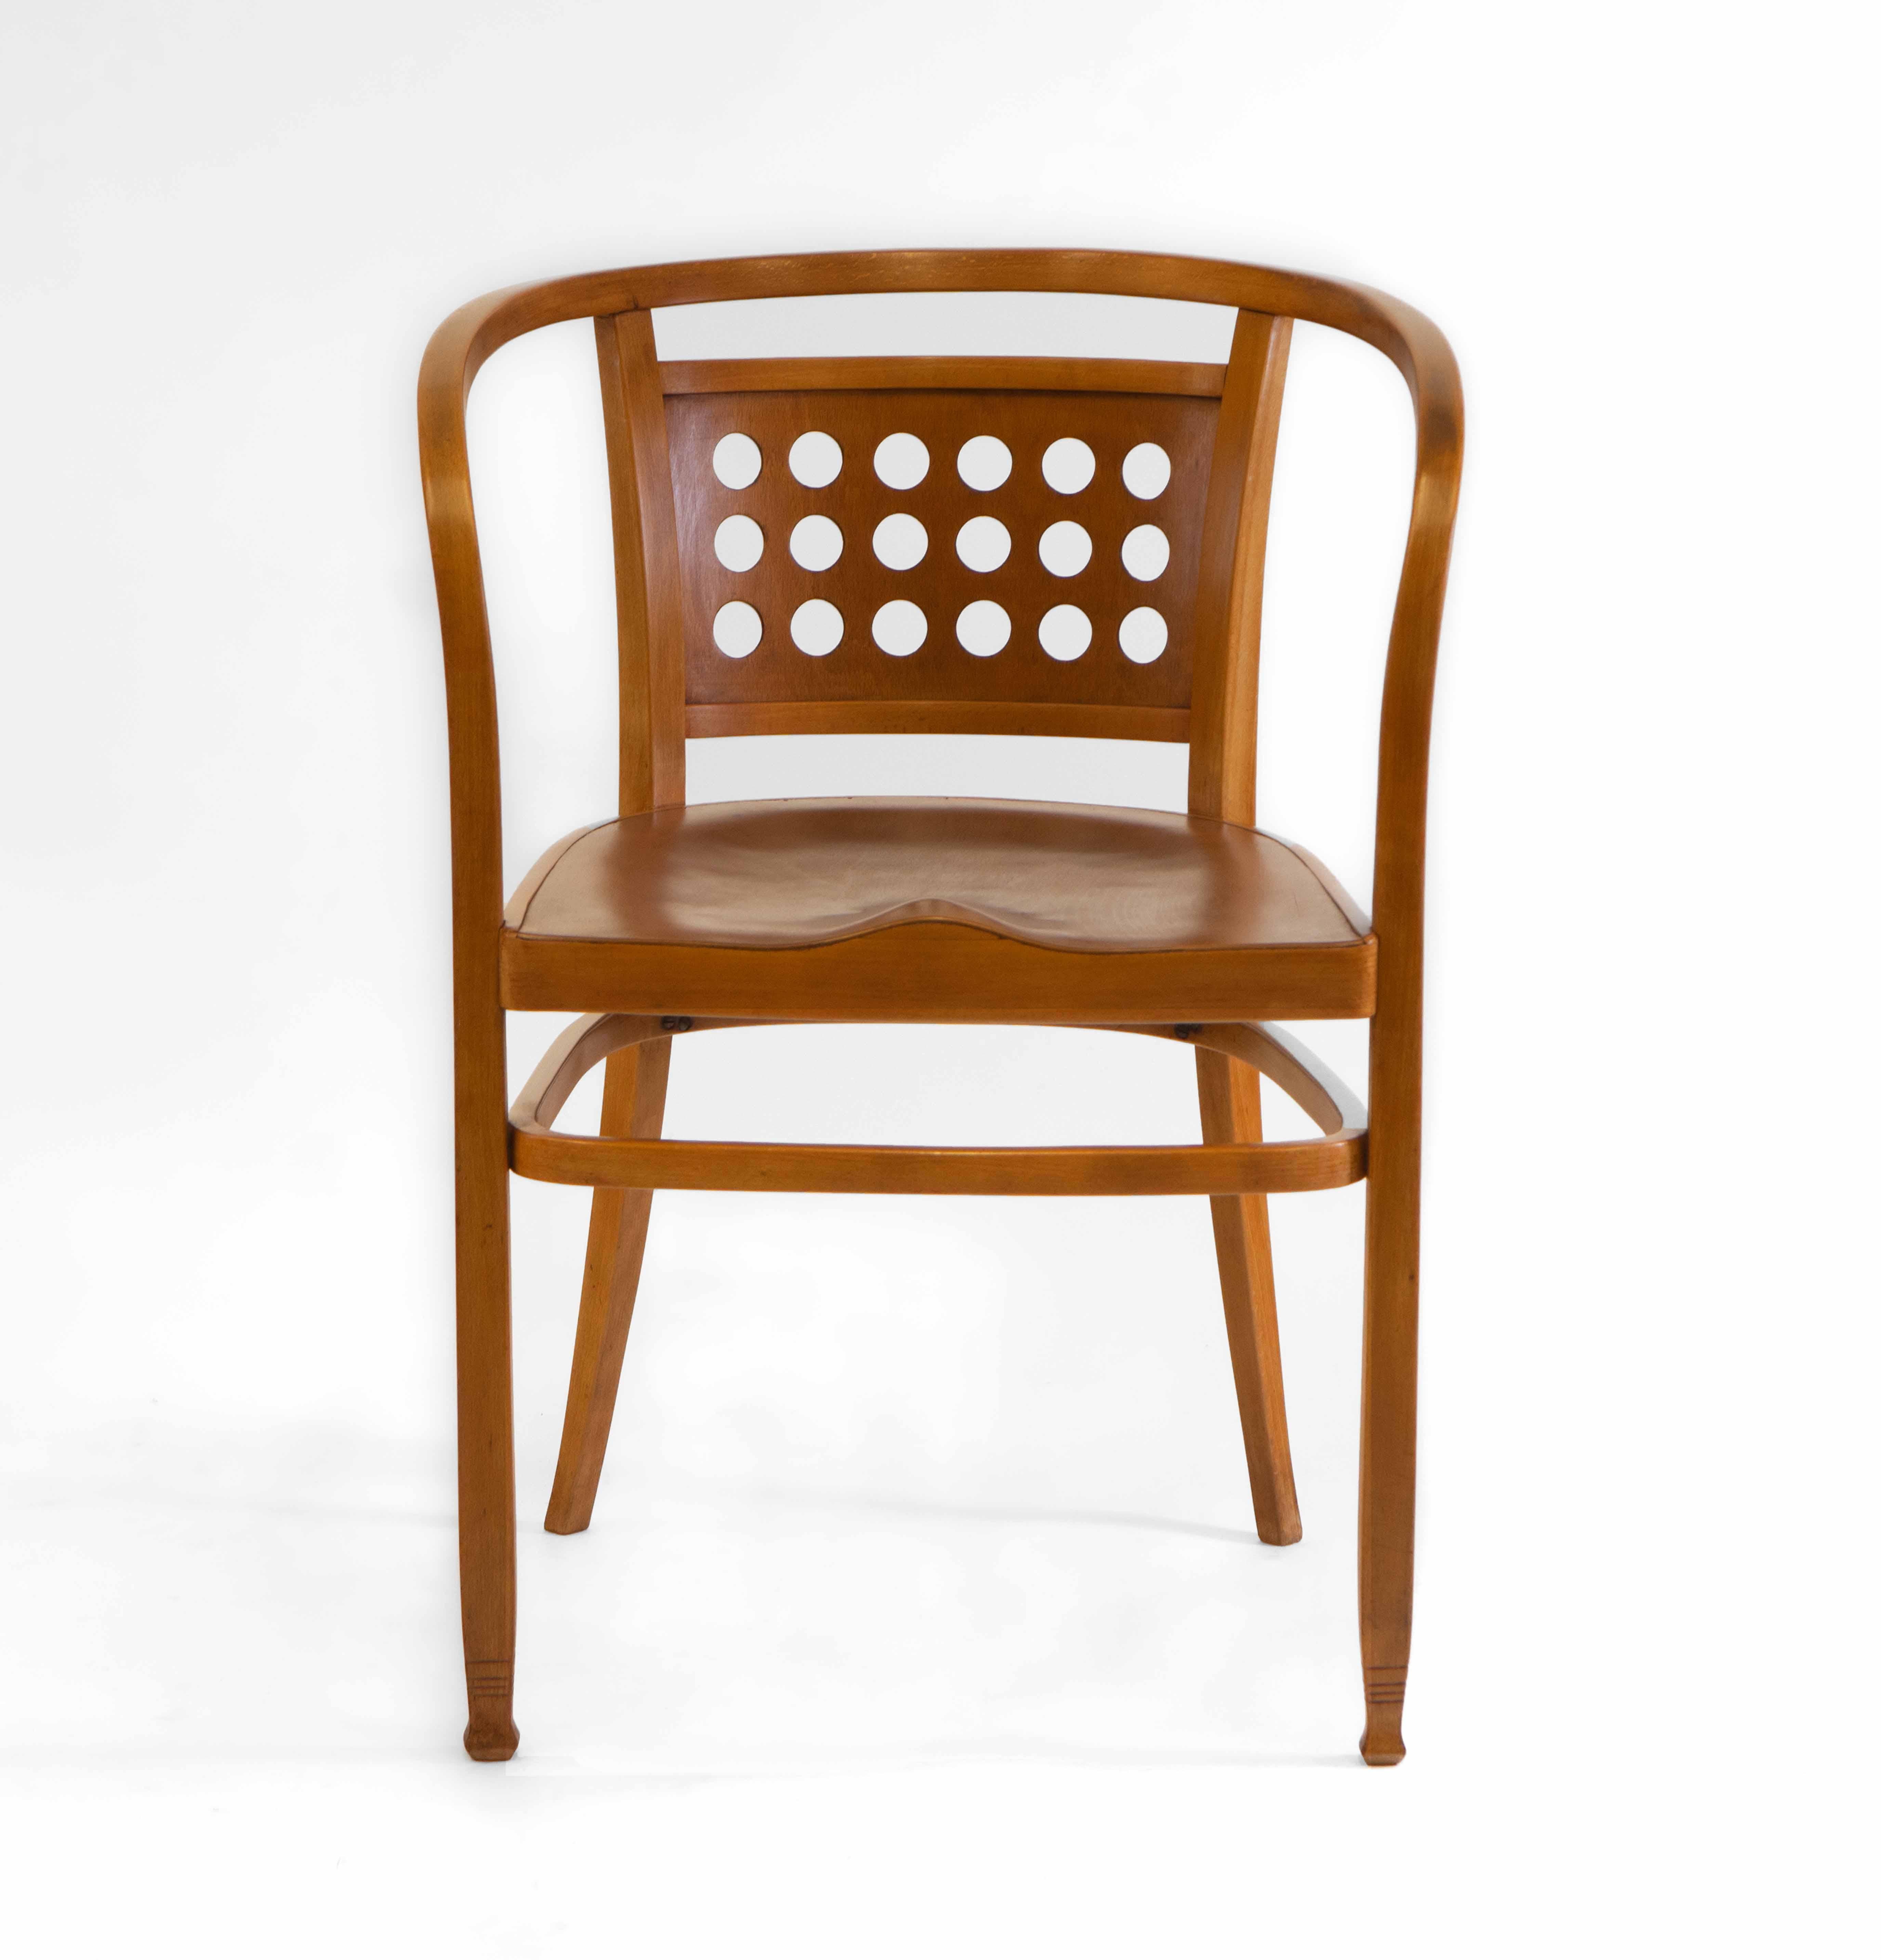 Austrian Vienna Secessionist Bentwood Armchair Designed By Otto Wagner